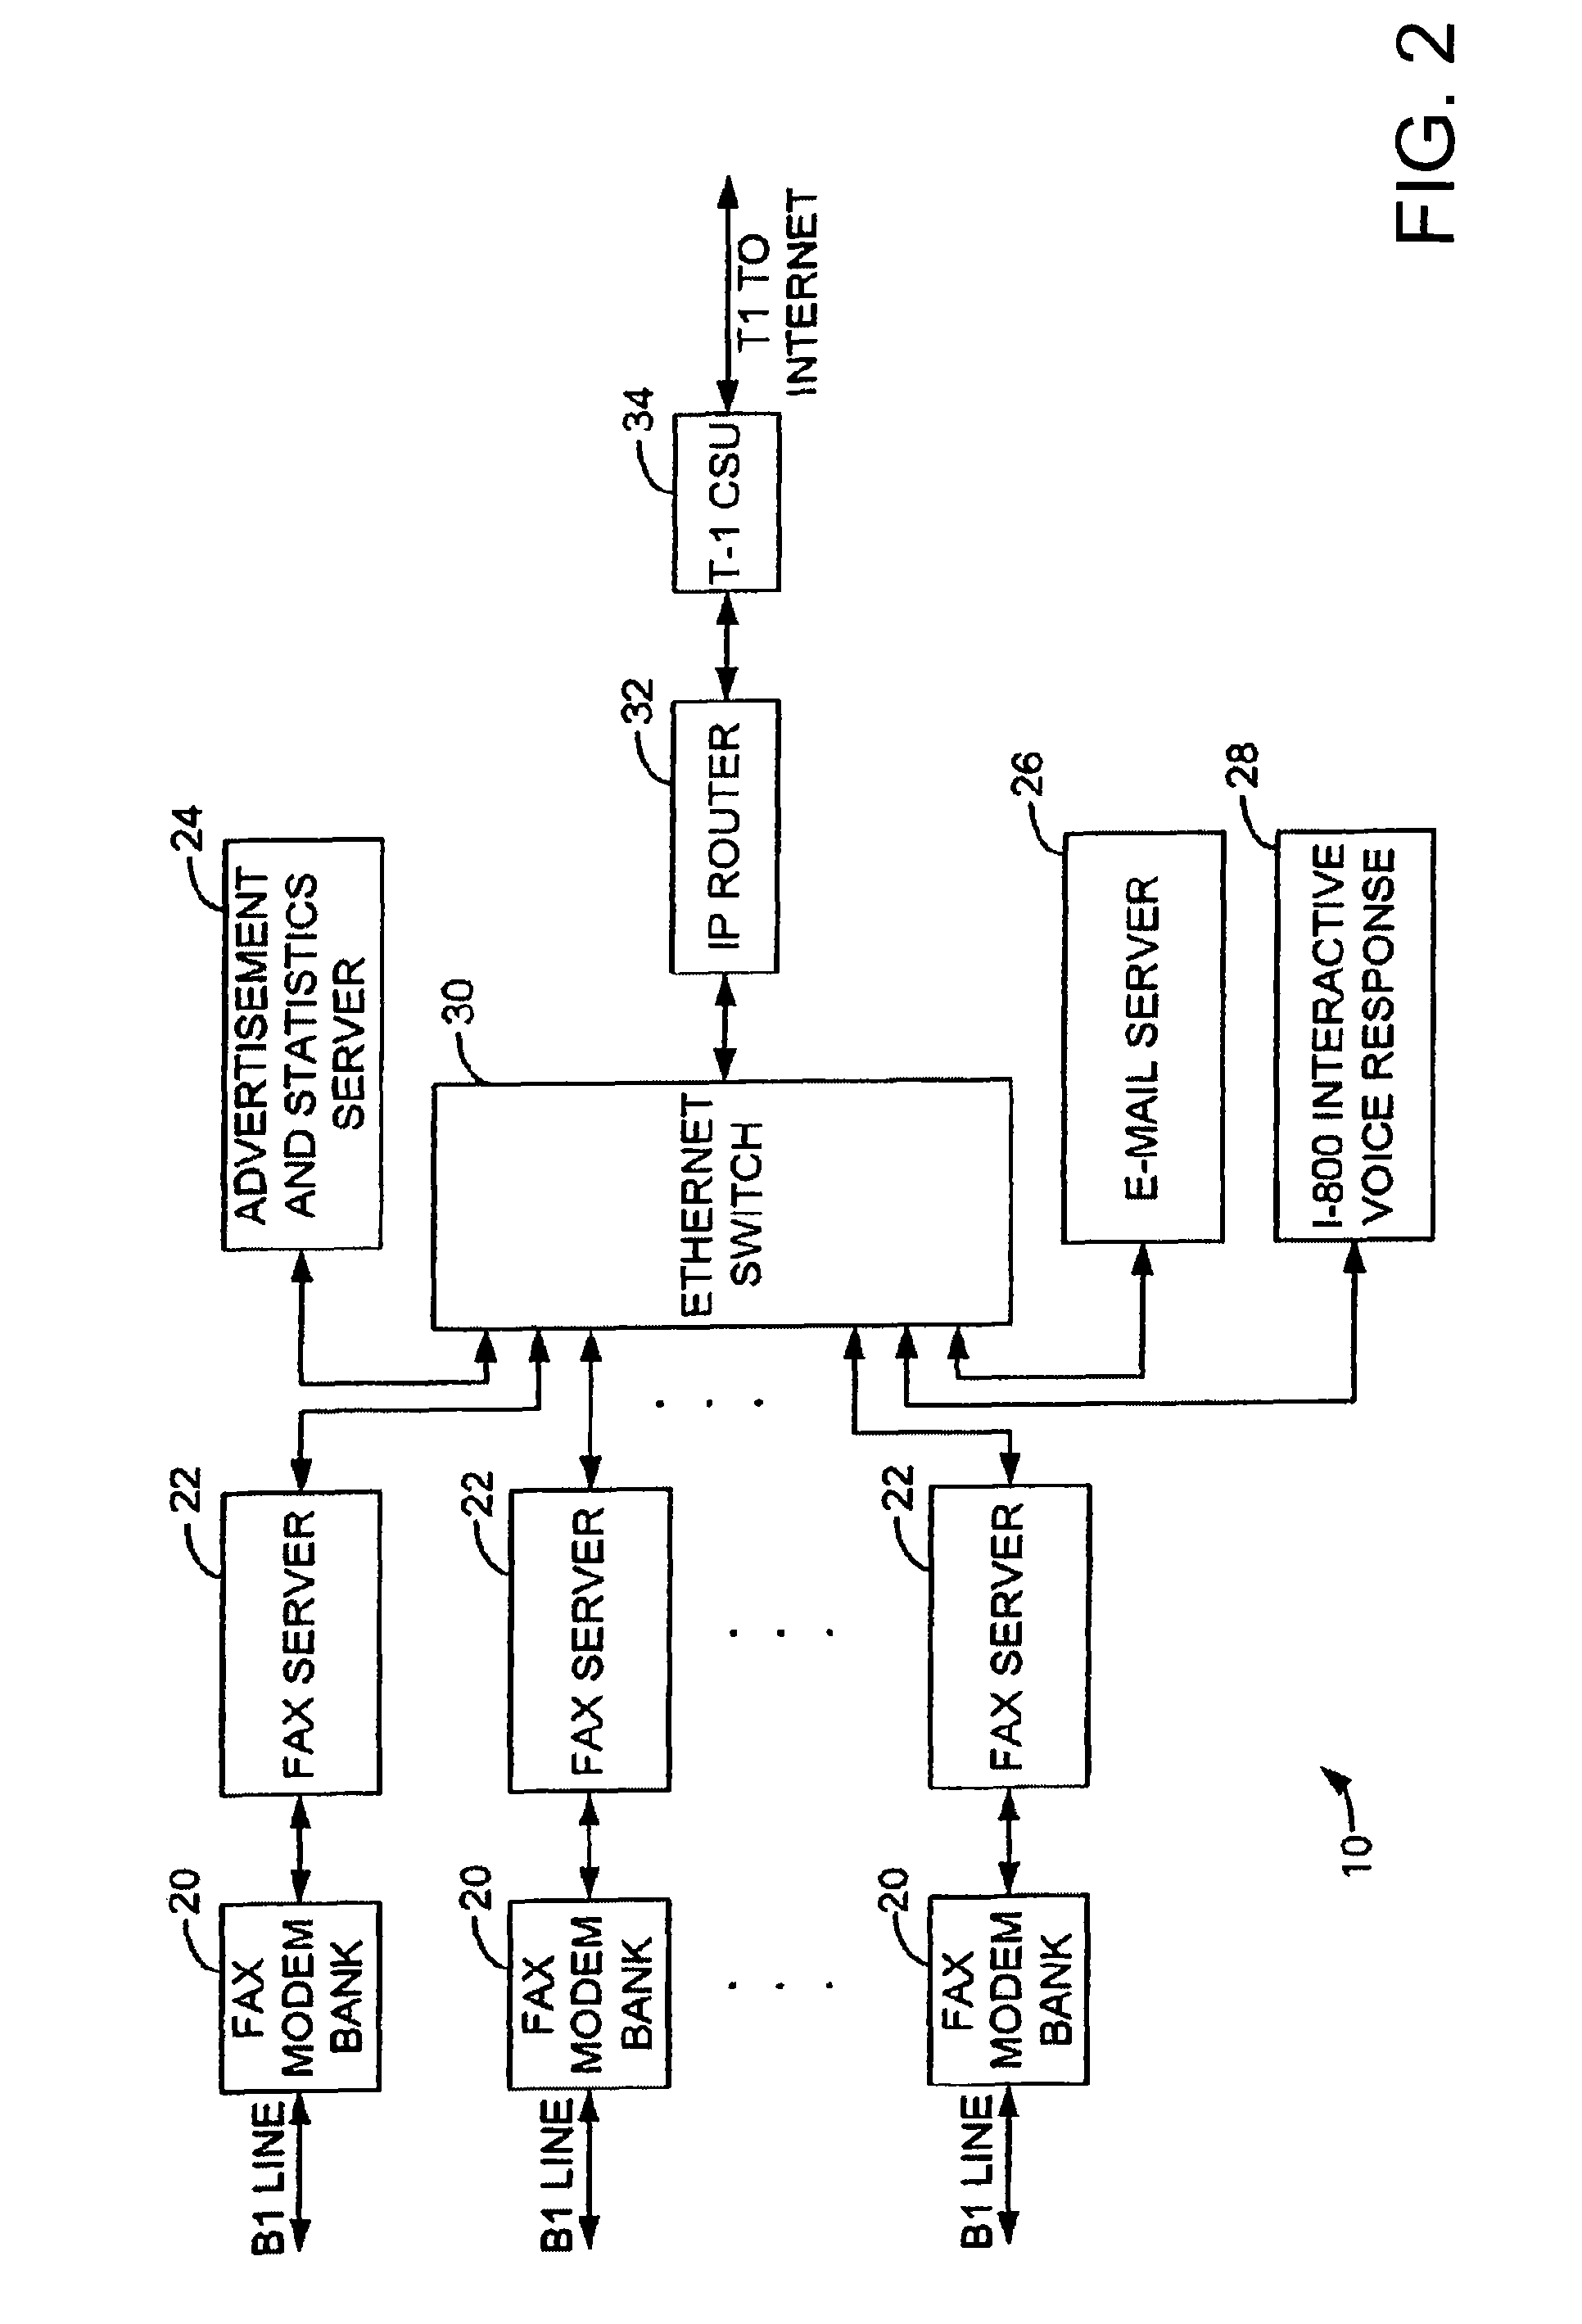 Method and system for pay per use document transfer via computer network transfer protocols